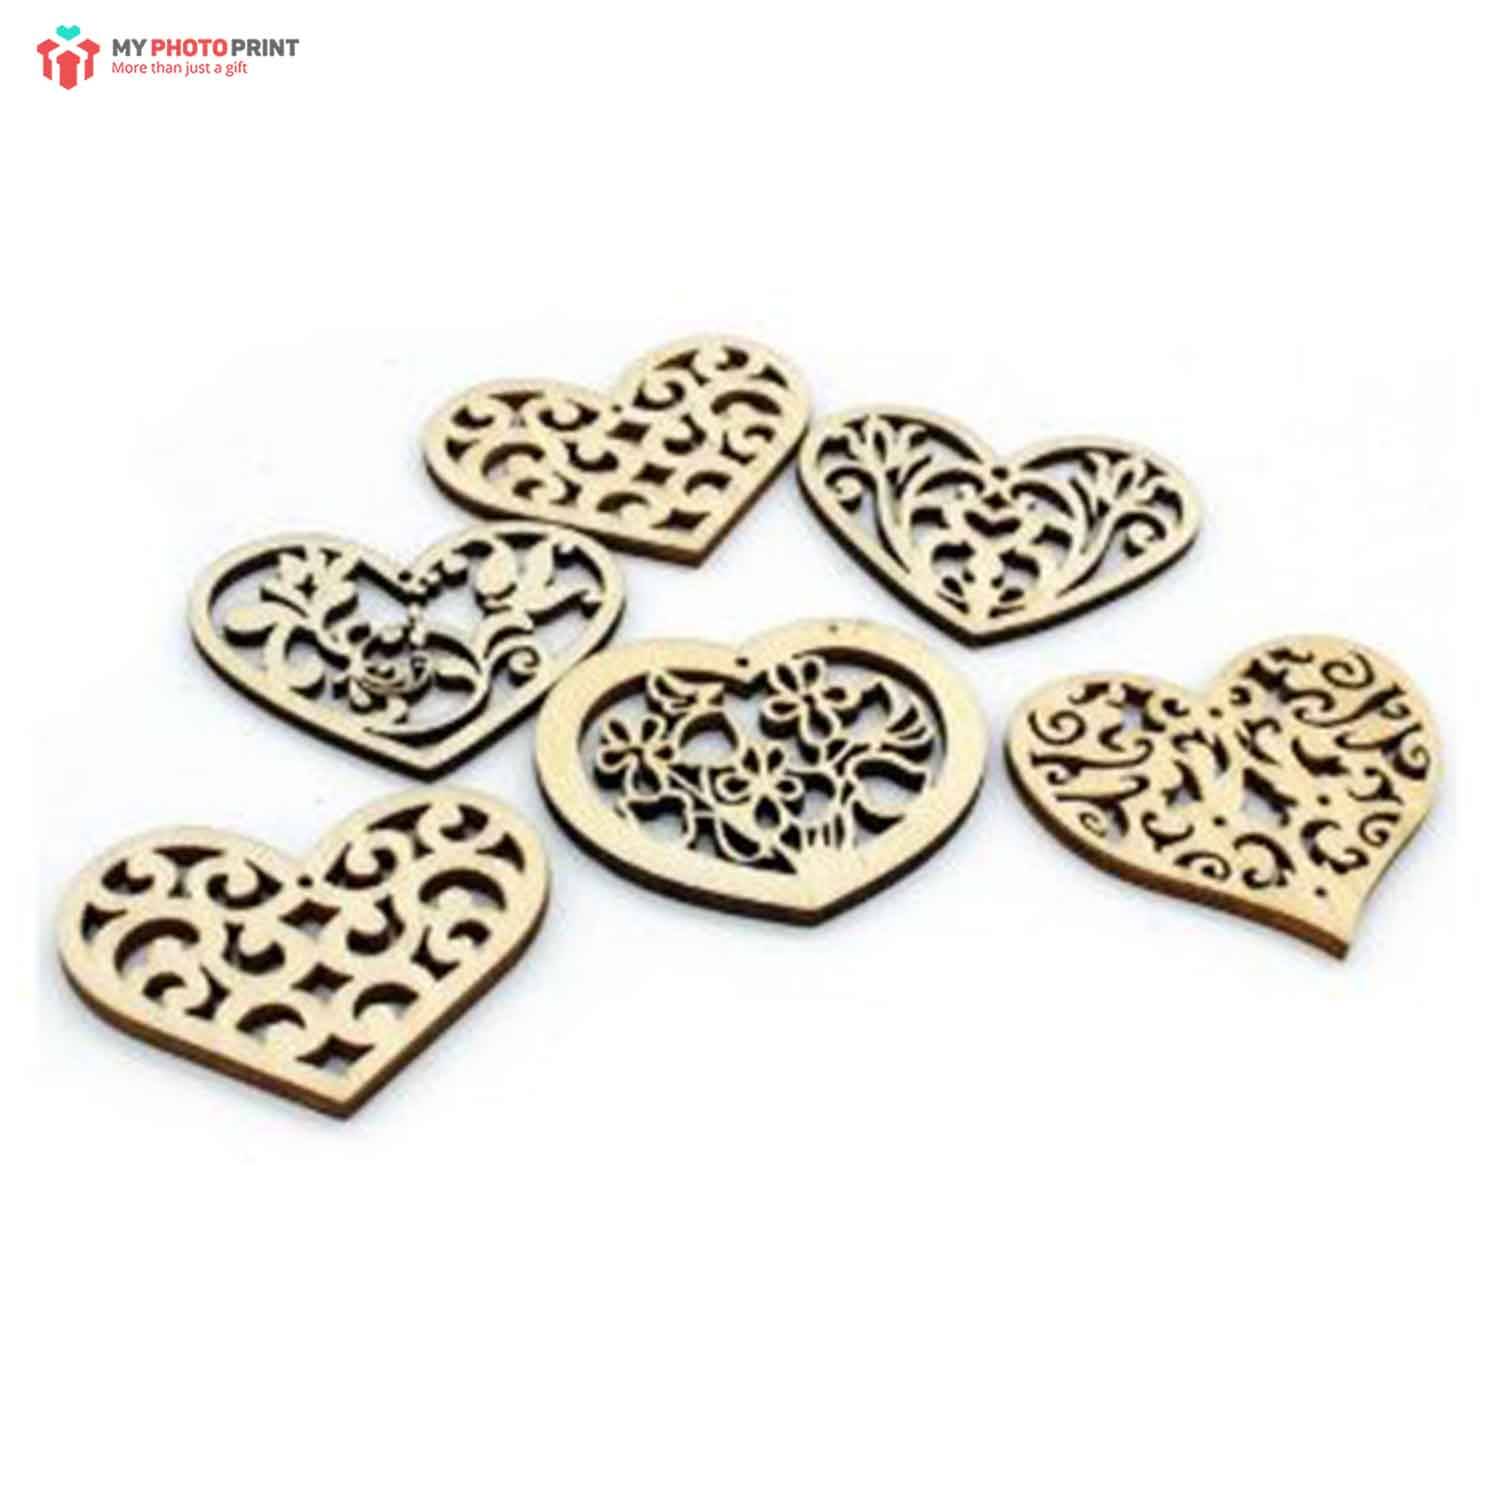 Heart Design MDF Wooden Craft Cutout Any Shapes & Patterns | (Pack Of 6pcs)